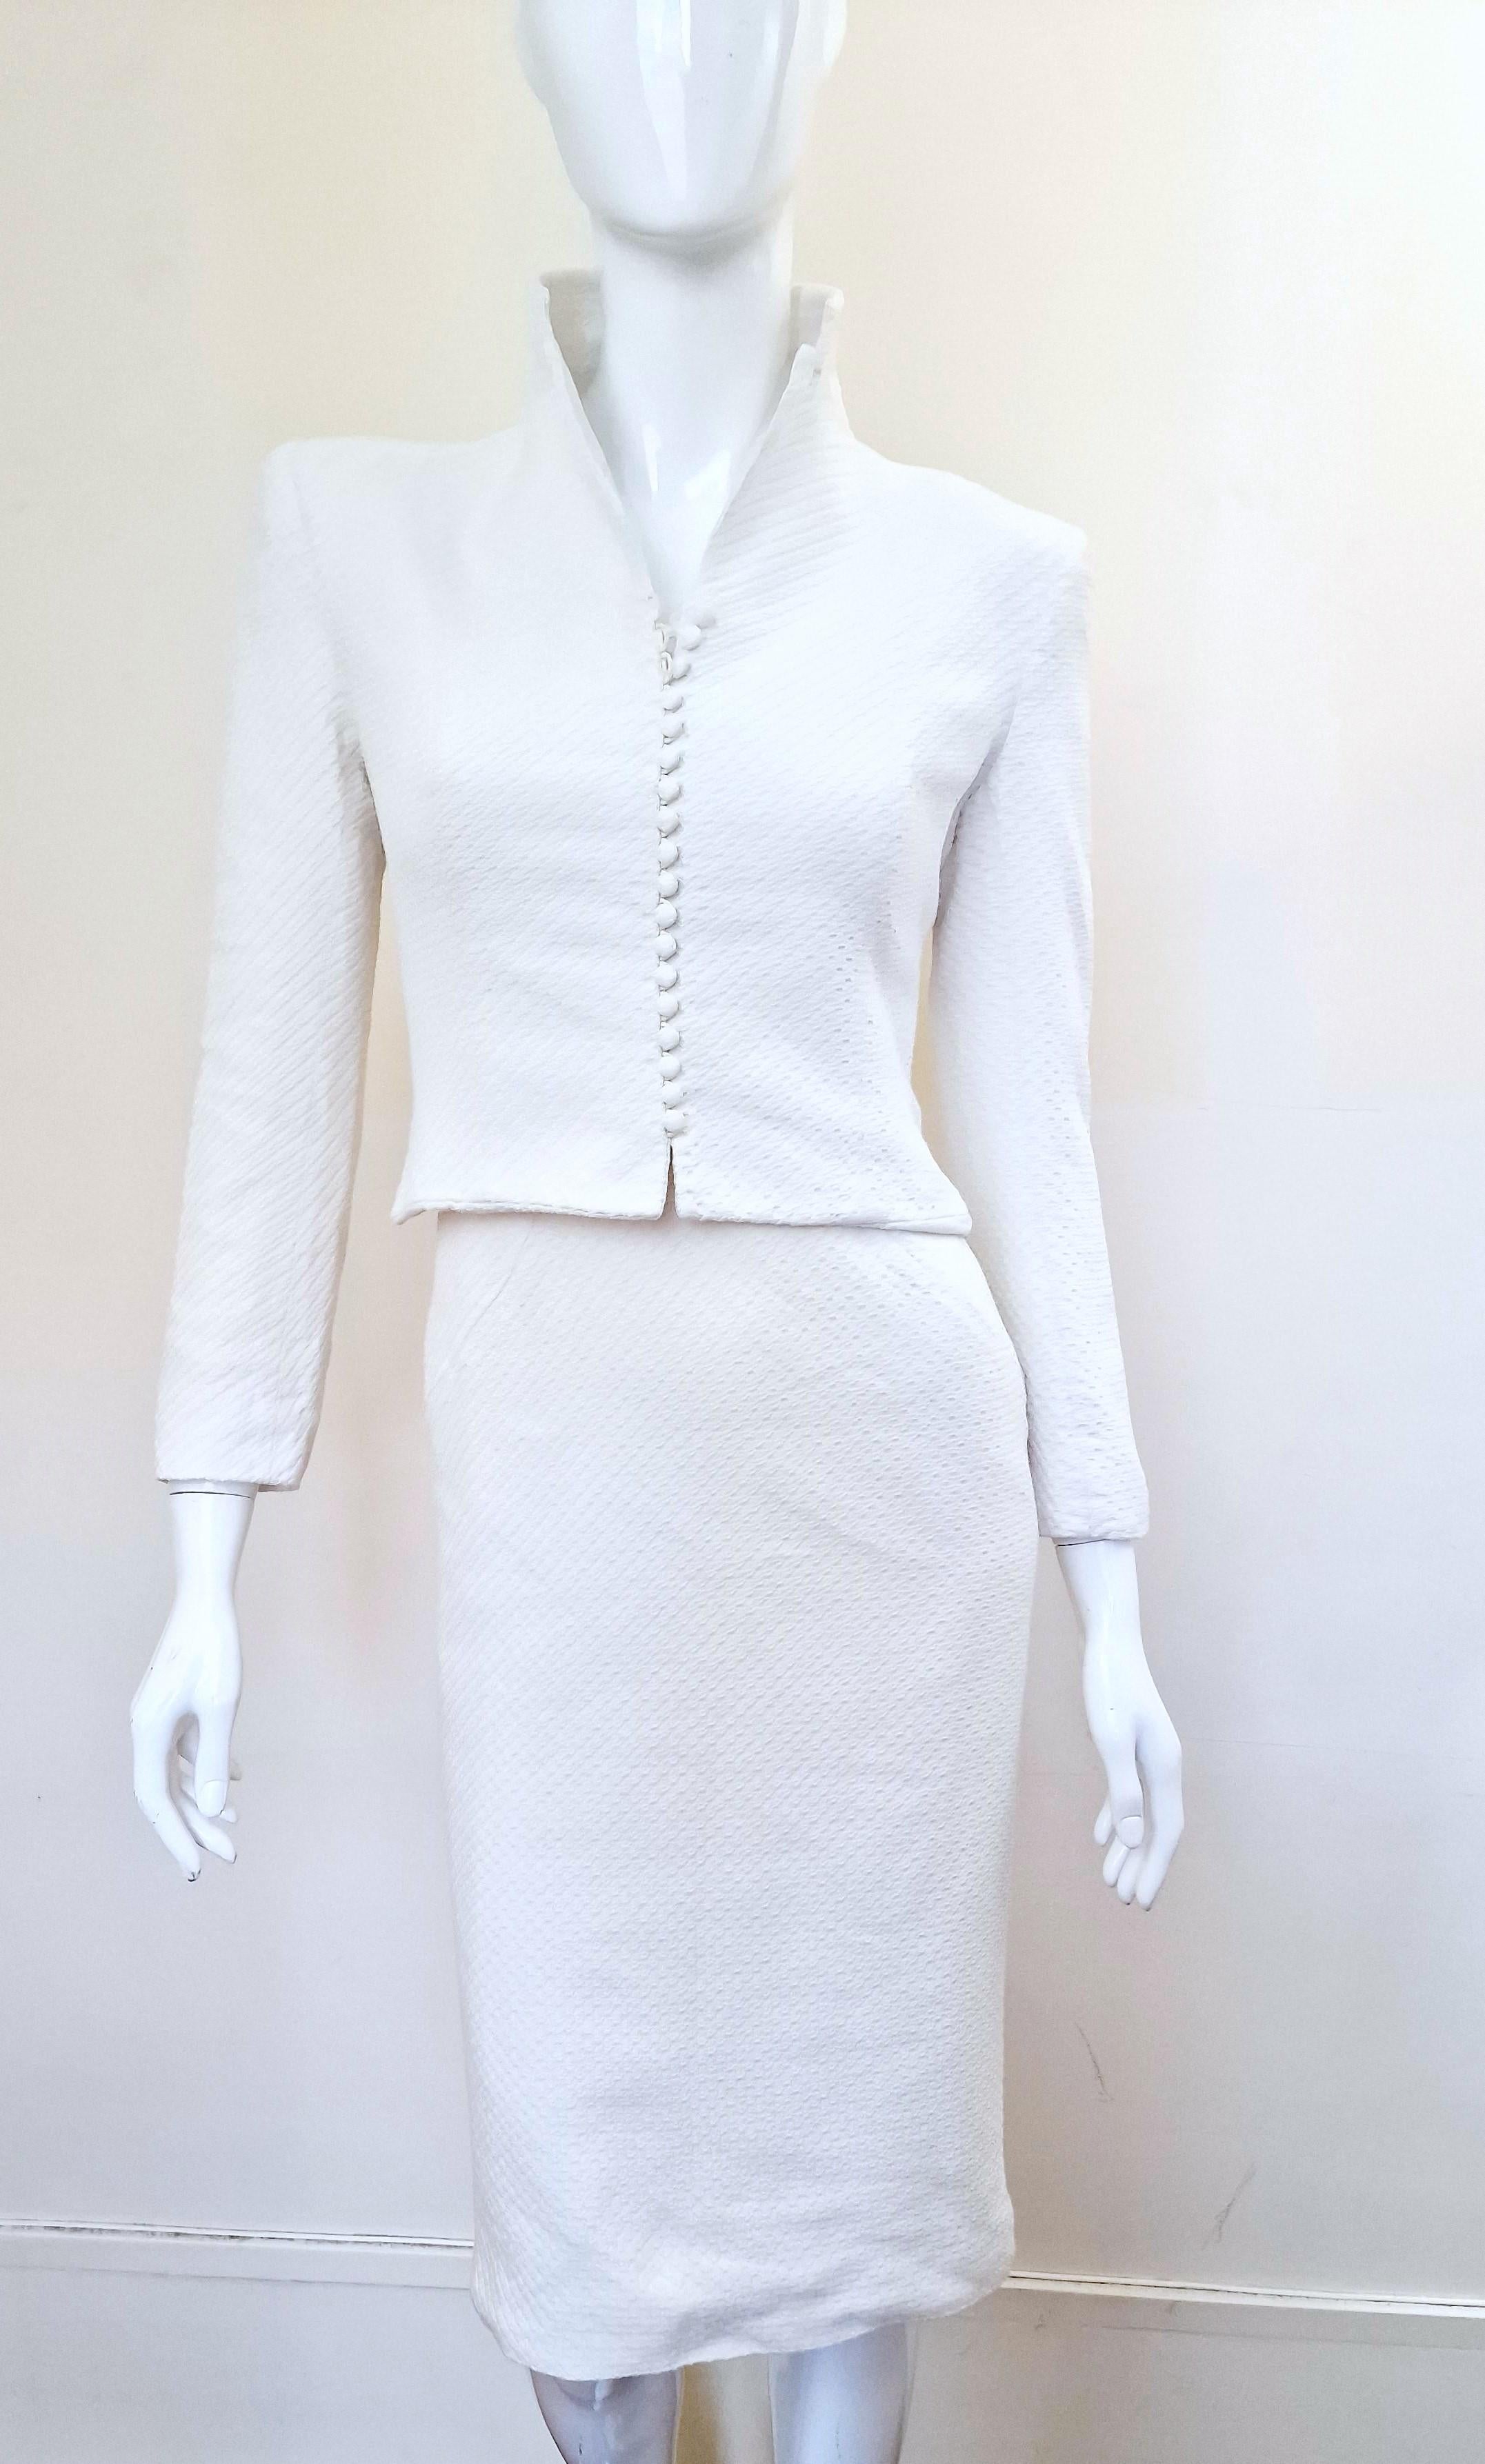 Early beautiful piece by John Galliano!
Dress + jacket set!
Wonderful silhouette!
18 buttons on the jacket.
The jacket has shoulder pads. 
Fully lined.

LIKE NEW!

SIZE
Fits from XS to small.
Marked size: small.

JACKET
Fits: size small.
Marked